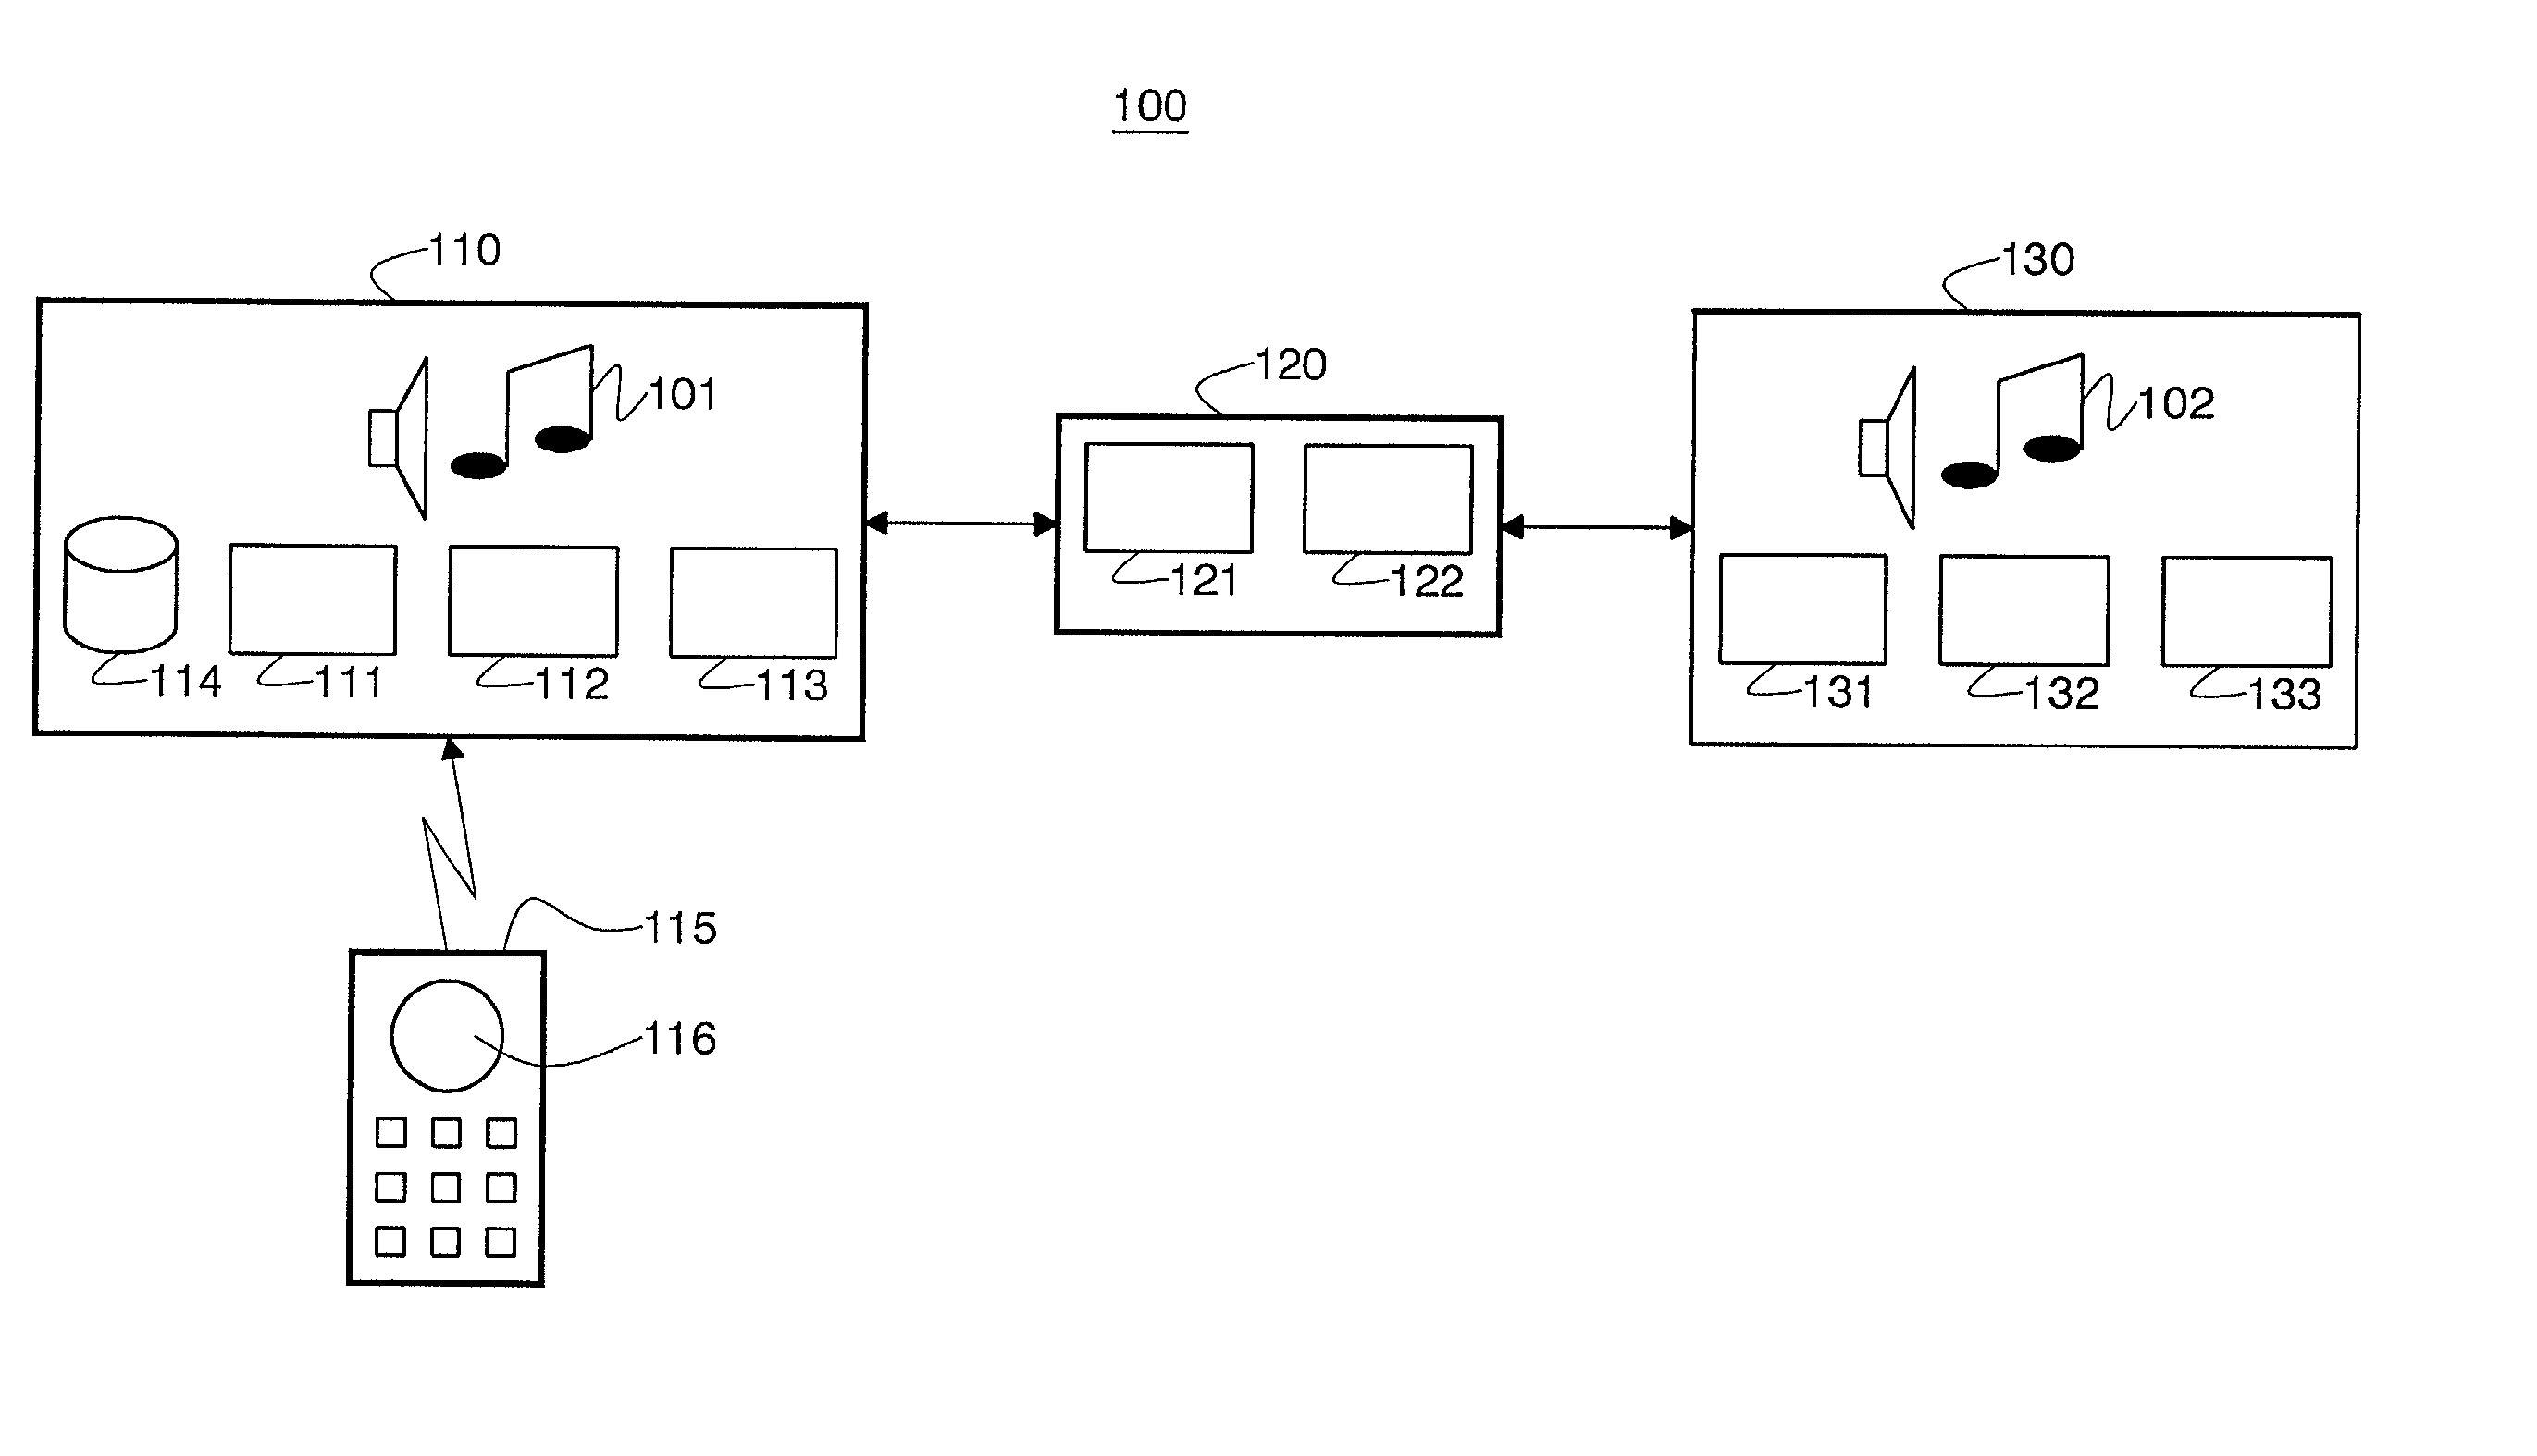 Method and arrangement for facilitating the sharing of content items